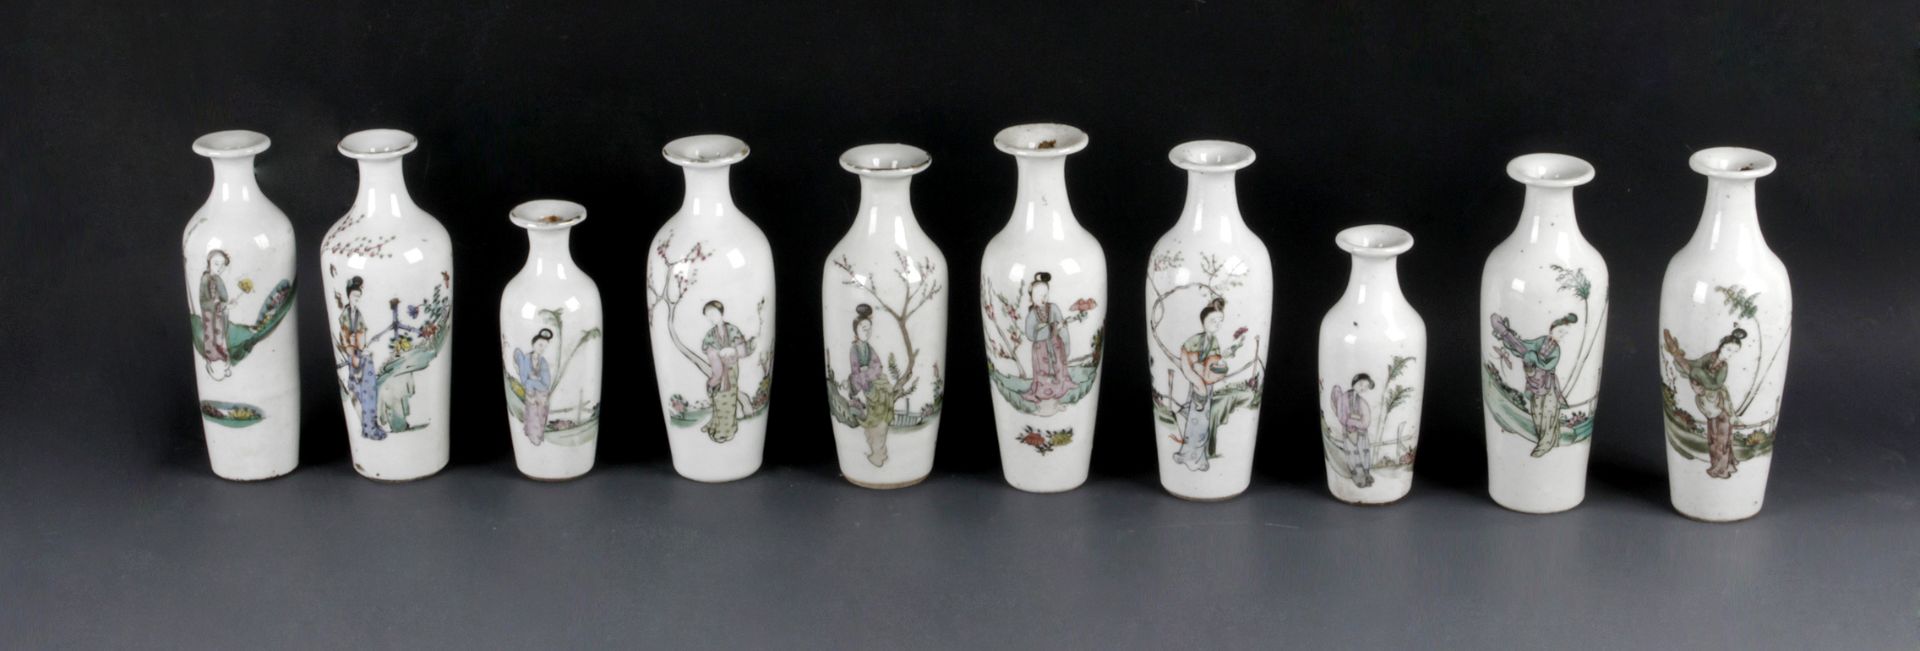 A collection of 10 Chinese porcelain vases from the Republic period